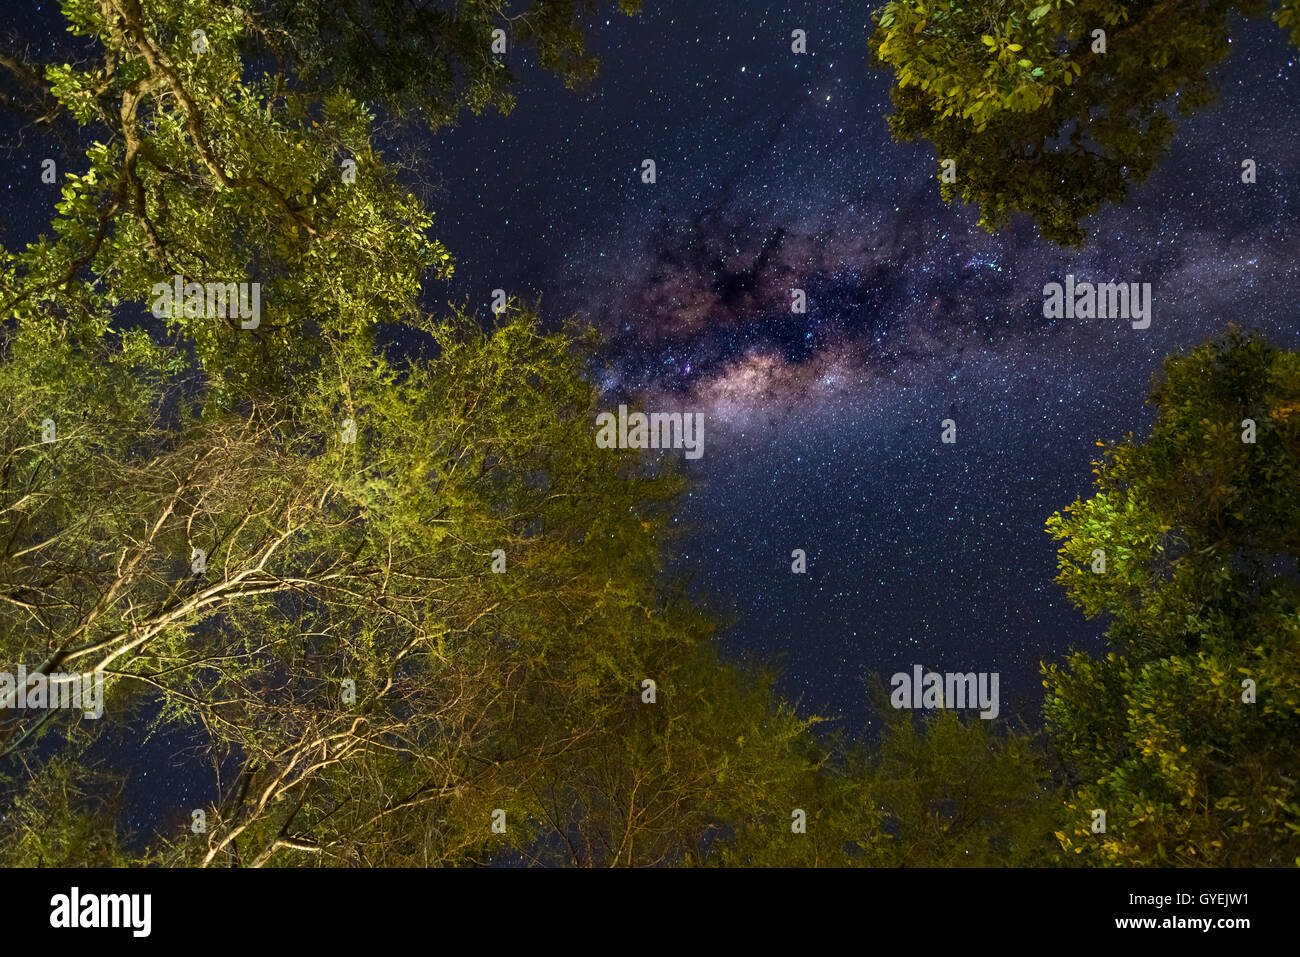 The austral Milky Way, with details of its colorful core, outstandingly bright. Captured from Acacia woodland in the Southern He Stock Photo